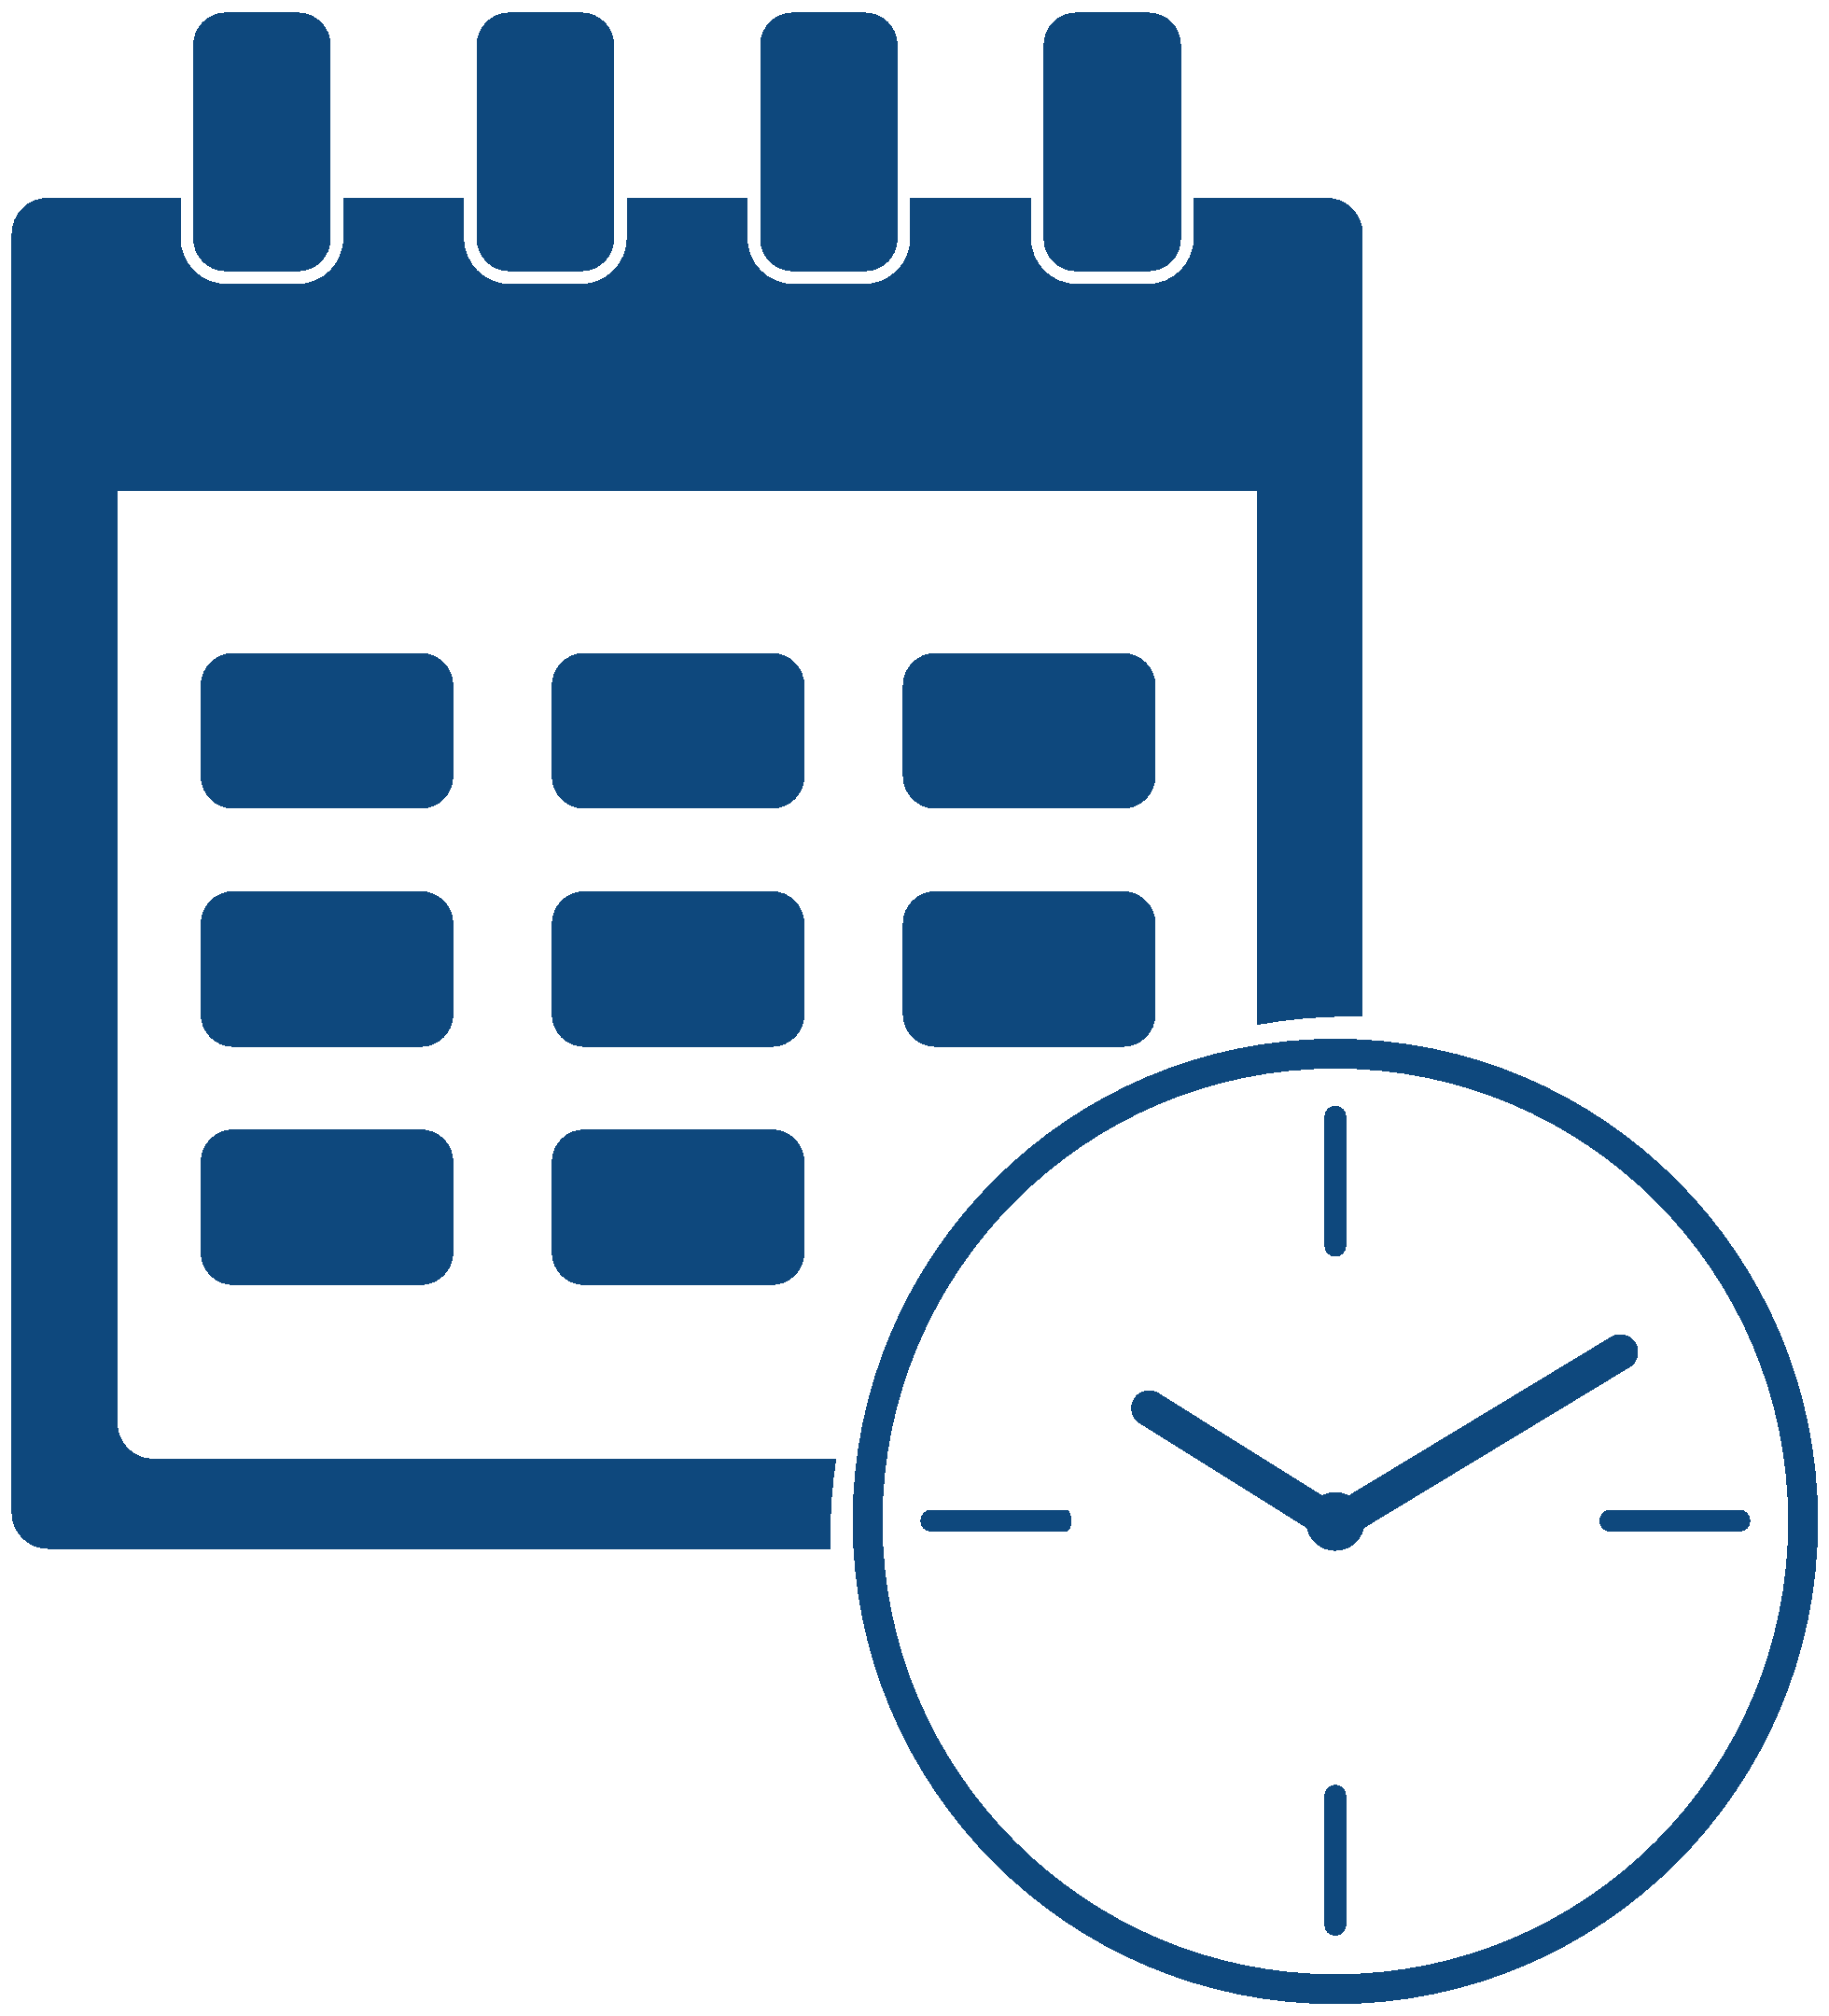 Calendar and clock icon to indicate scheduling a consultation information